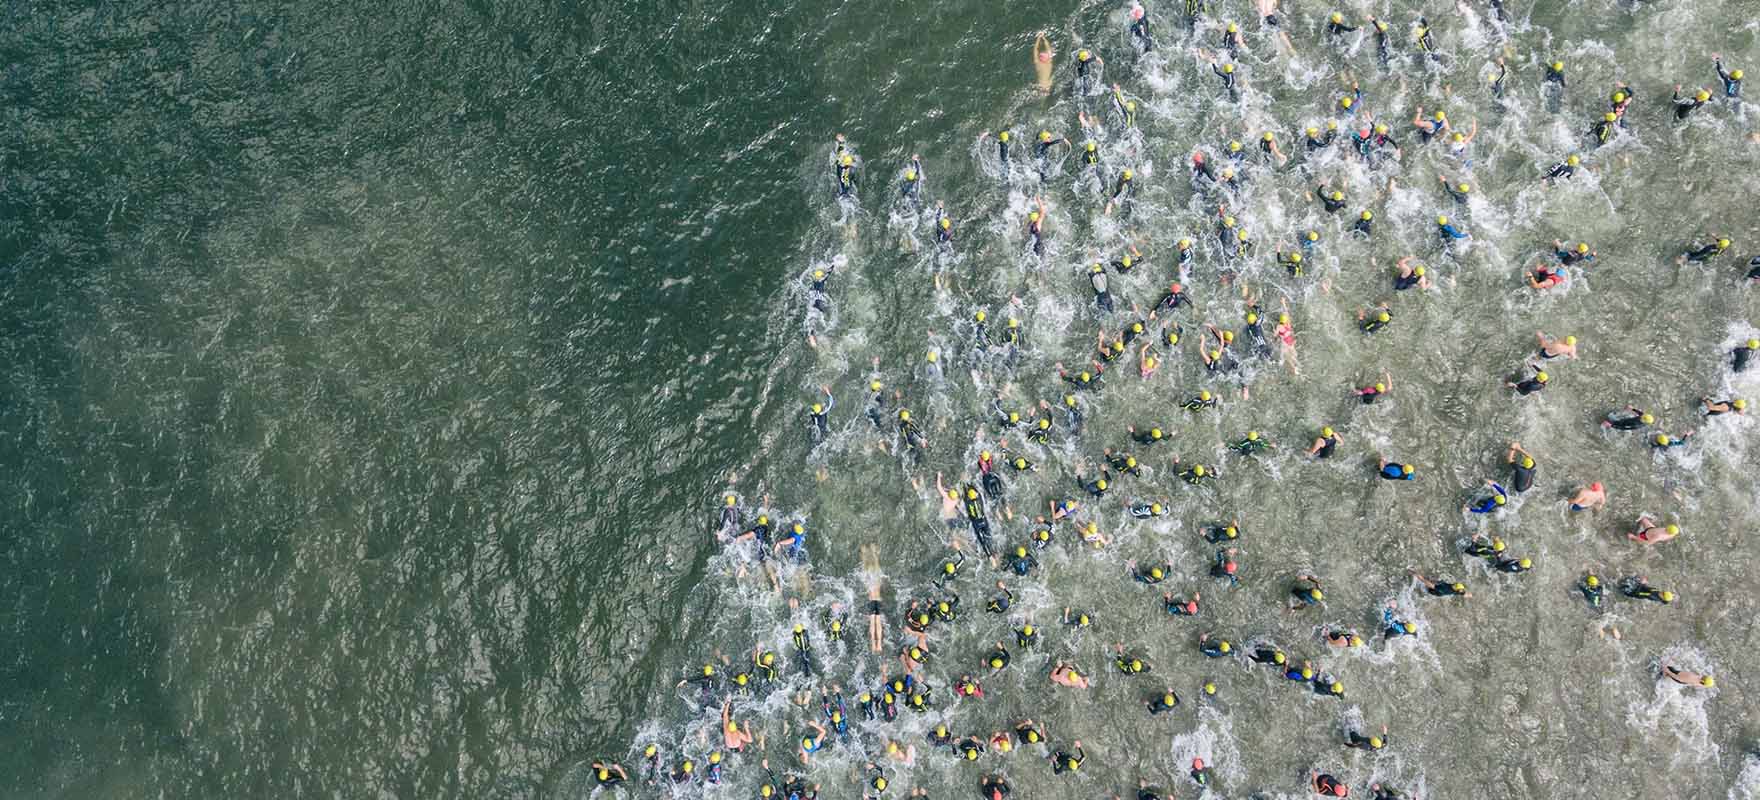 Top view of triathlon athletes going to the water